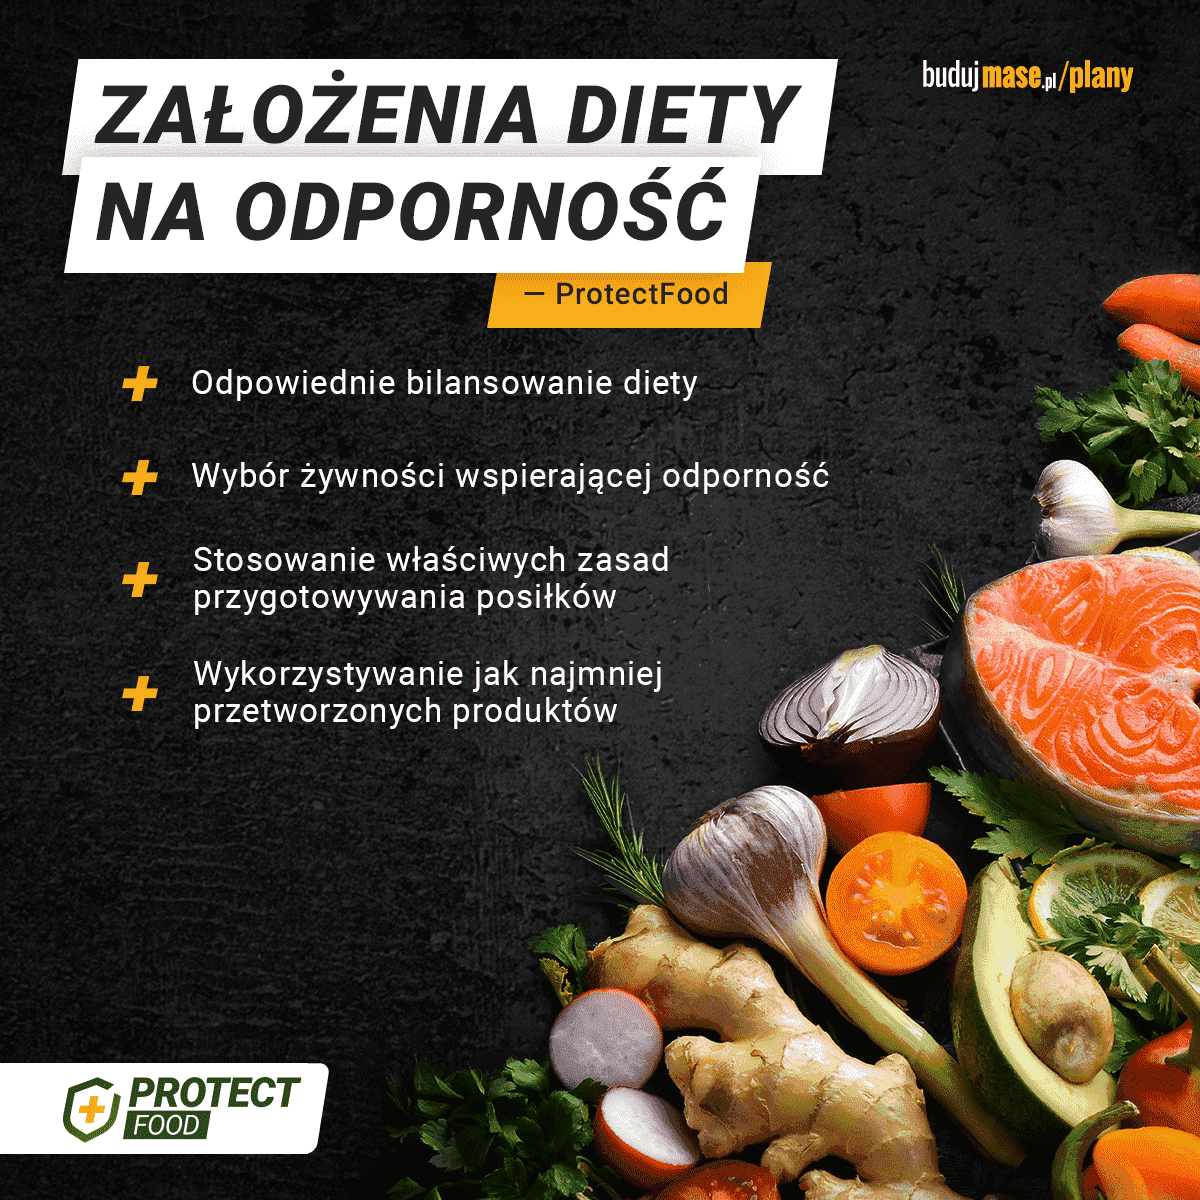 Co to jest Protect Food?